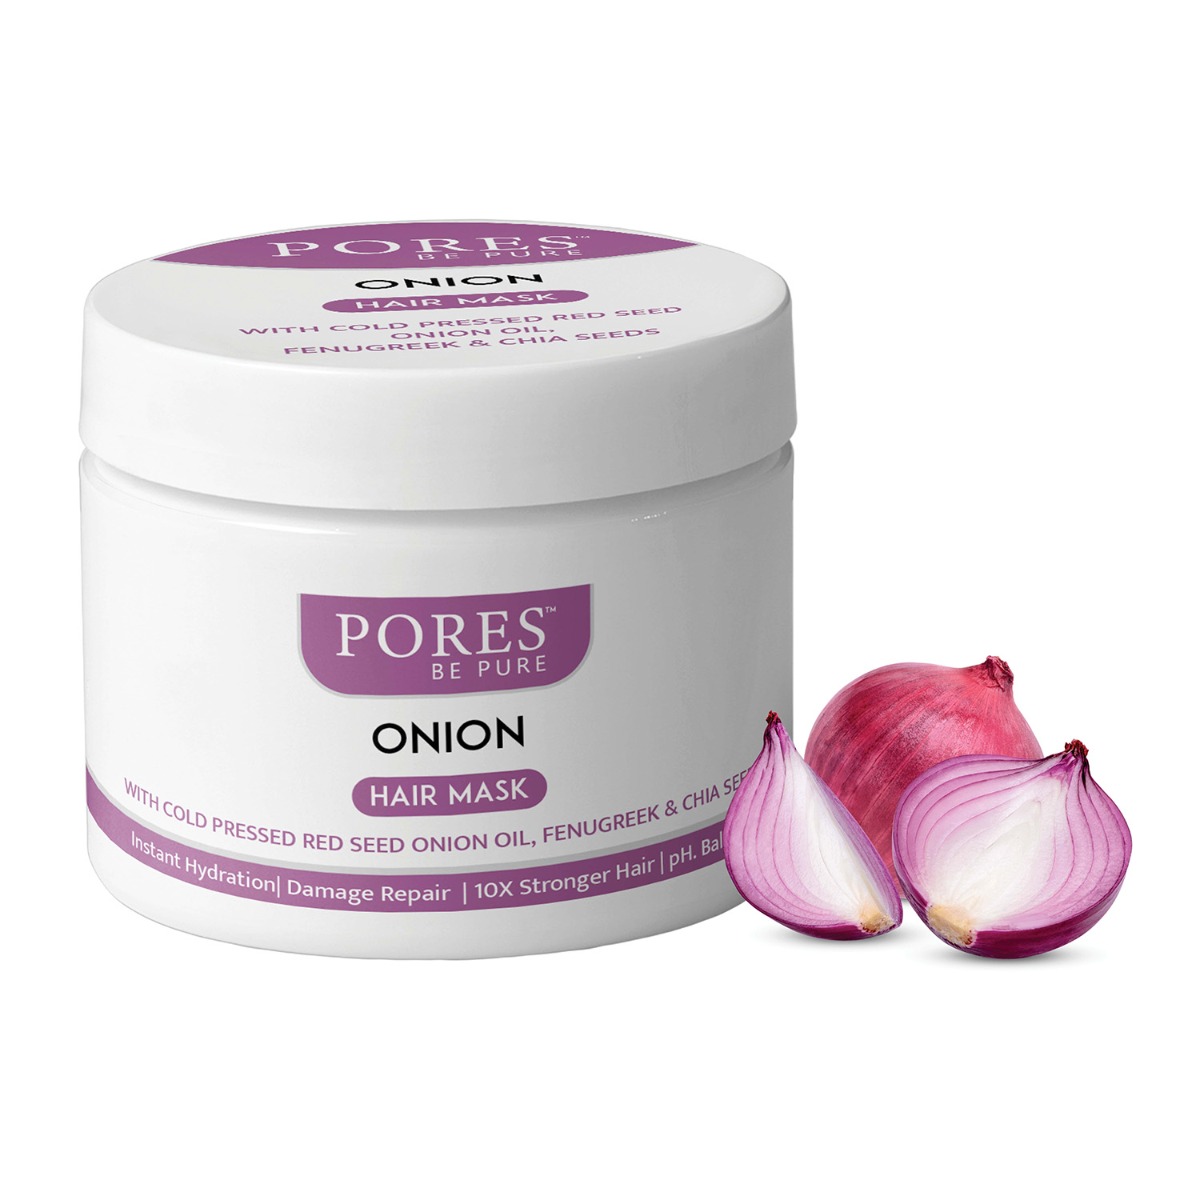 PORES Be Pure Onion Hair Mask, 200gm